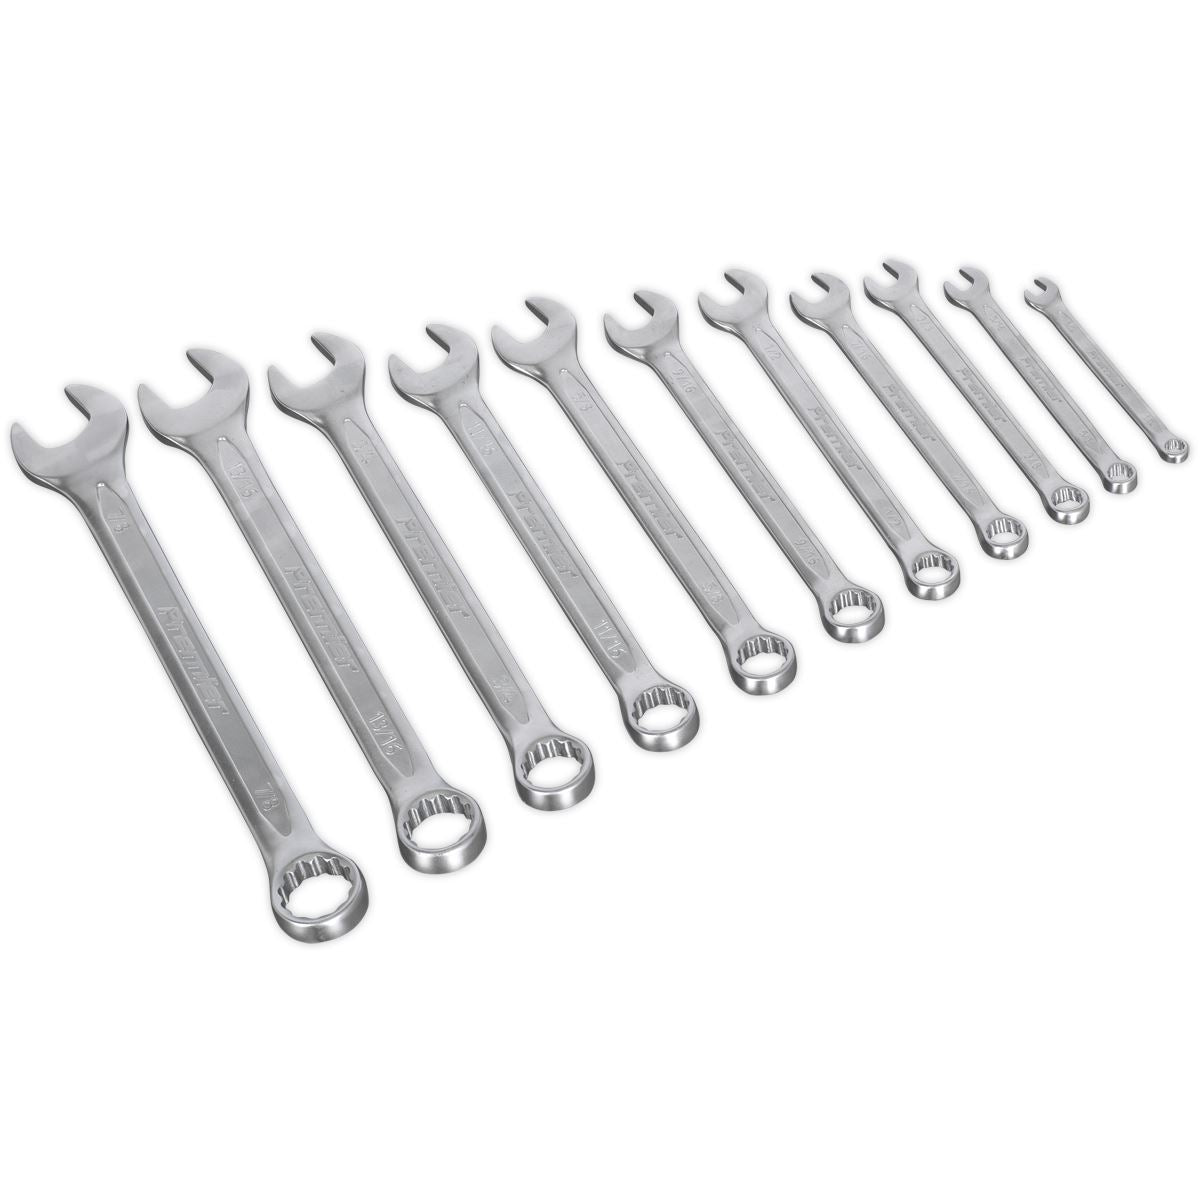 Sealey Premier 11 Piece Cold Stamped Combination Spanner Set Imperial 1/4"-7/8